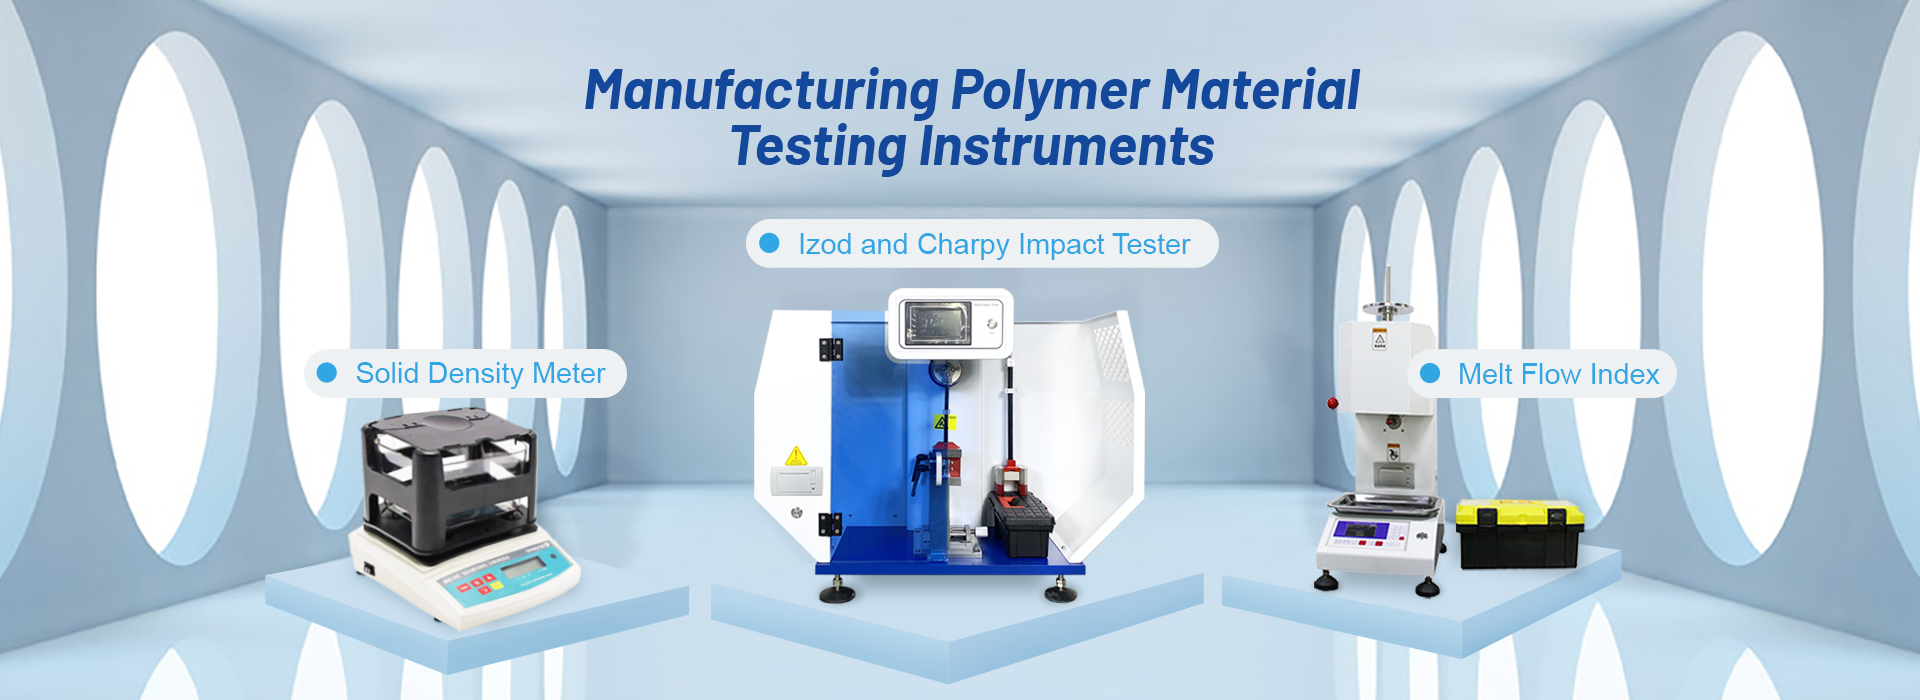 Manufacturing Polymer Material